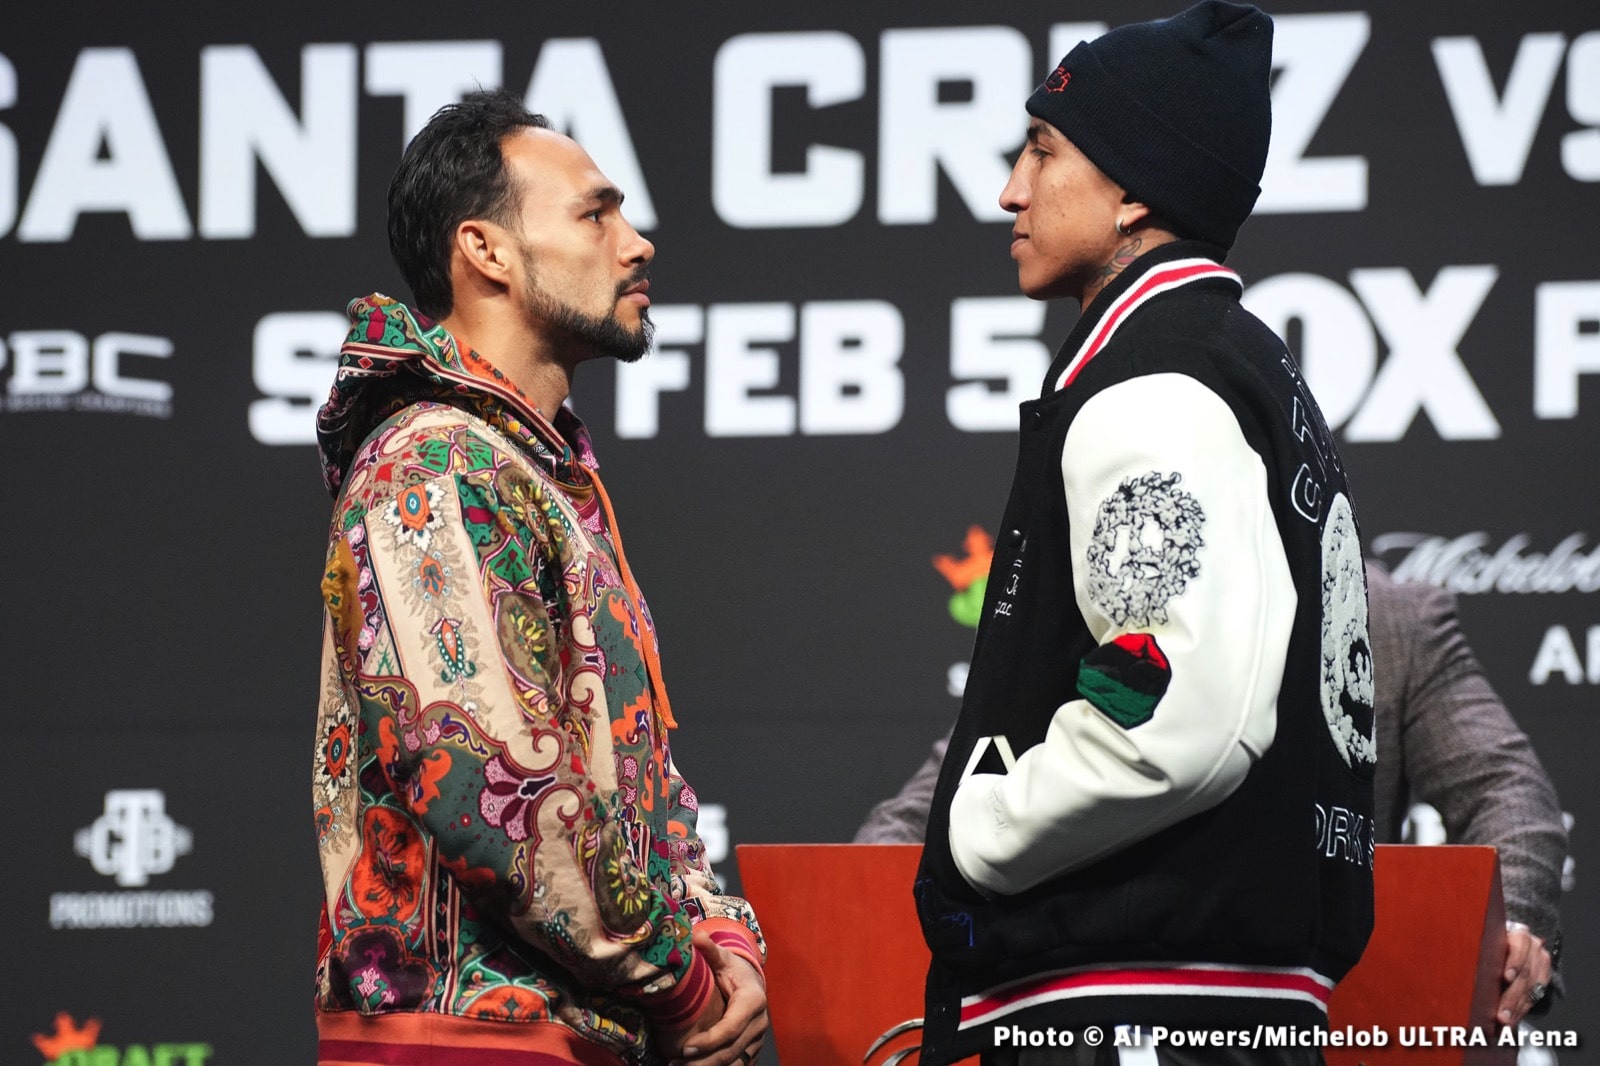 Image: Keith Thurman - Mario Barrios Weigh In Live Stream